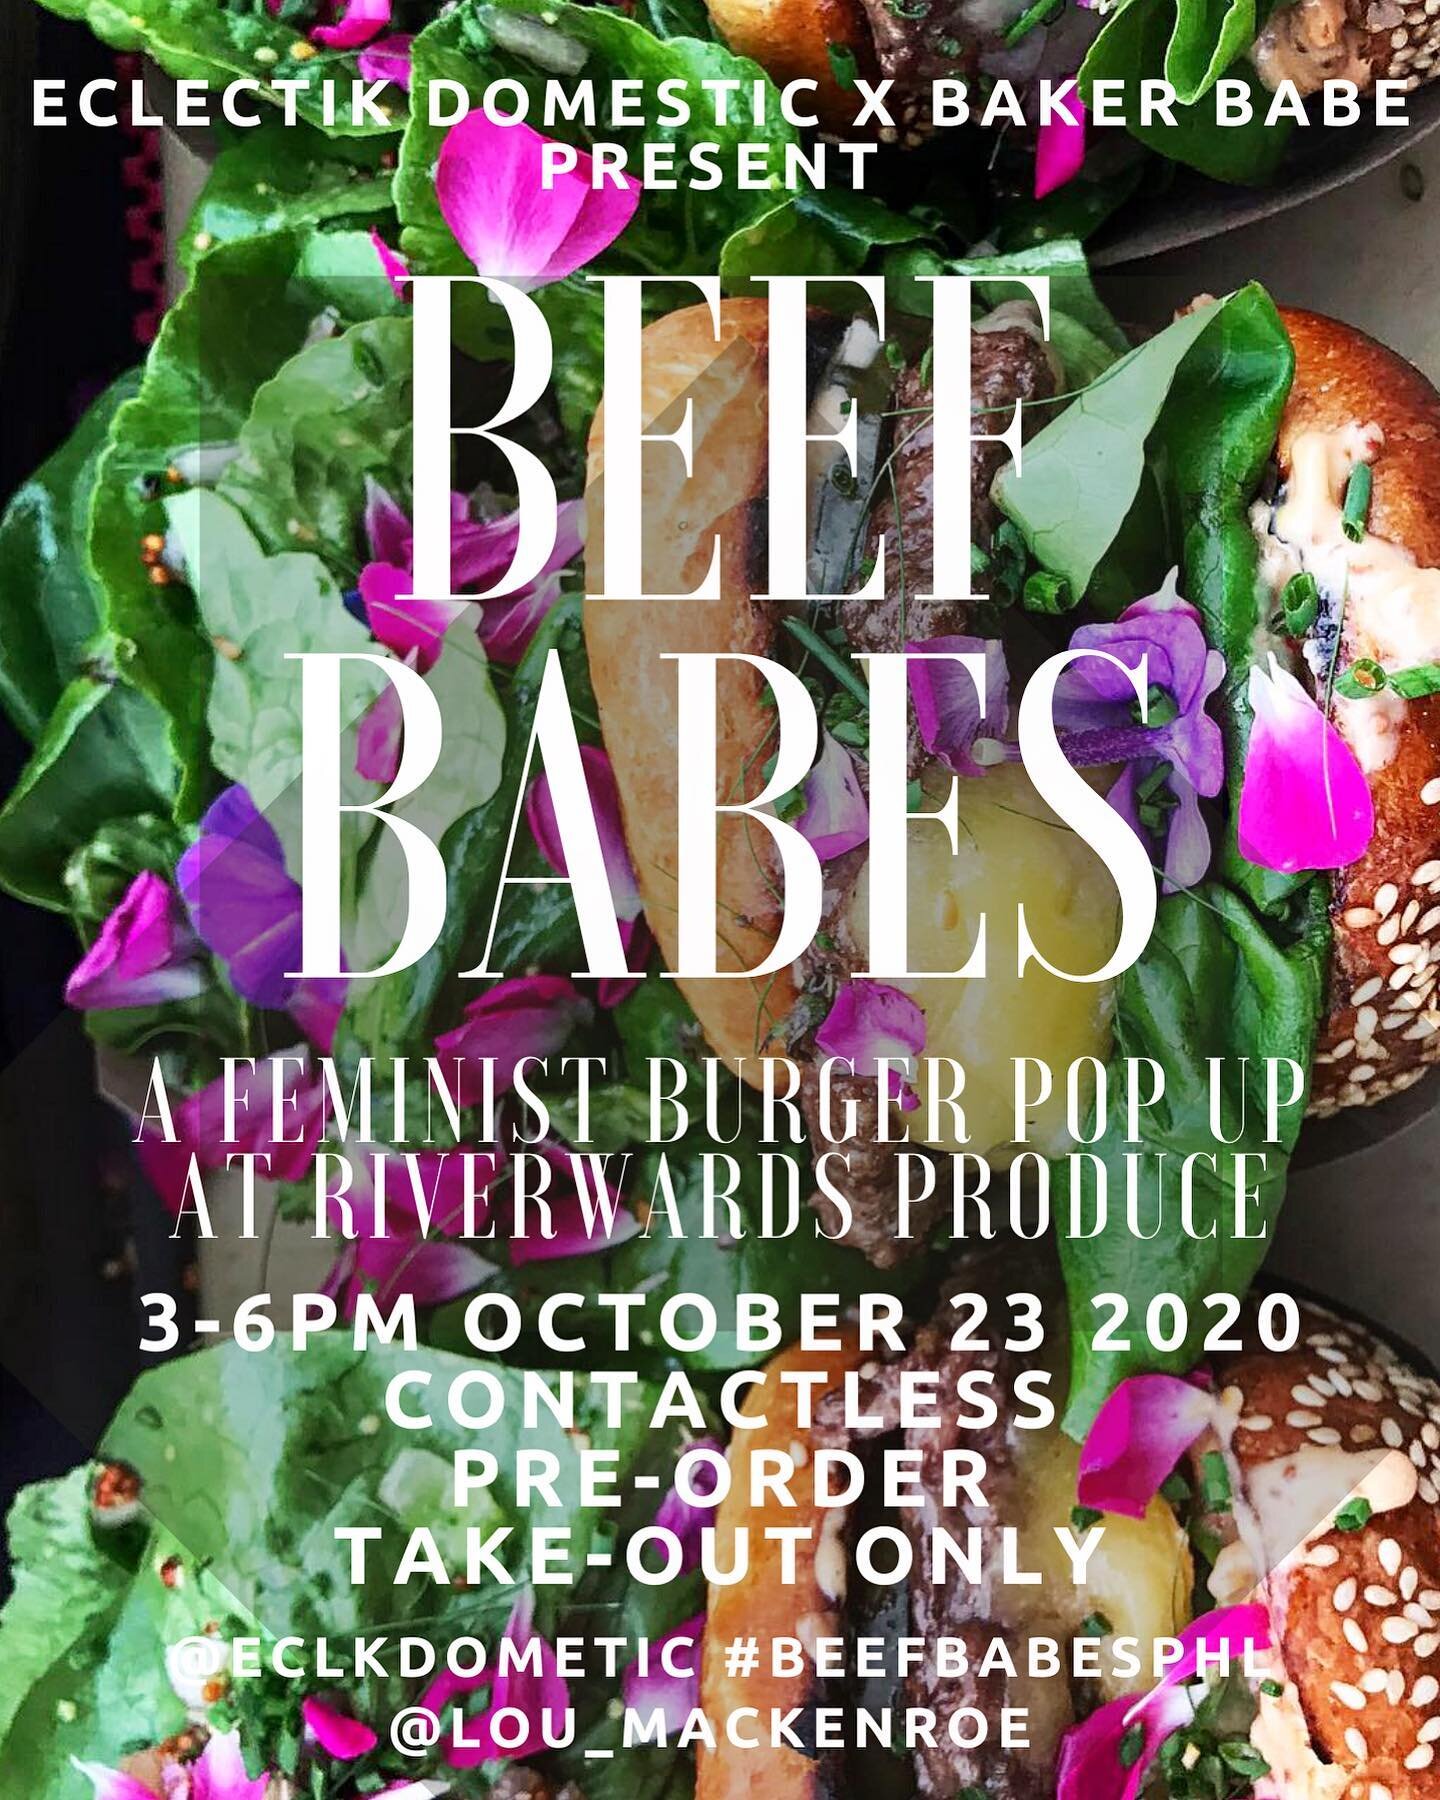 Next Friday, October 23rd were popping up @riverwardsproduce! 10% of our revenue will be donated to the Black and Brown Worker&rsquo;s Co-op and @powerthepolls! Preorder is open till Wednesday at 4pm!  #linkinbio #beefbabesphl #blacklivesmatter #vote